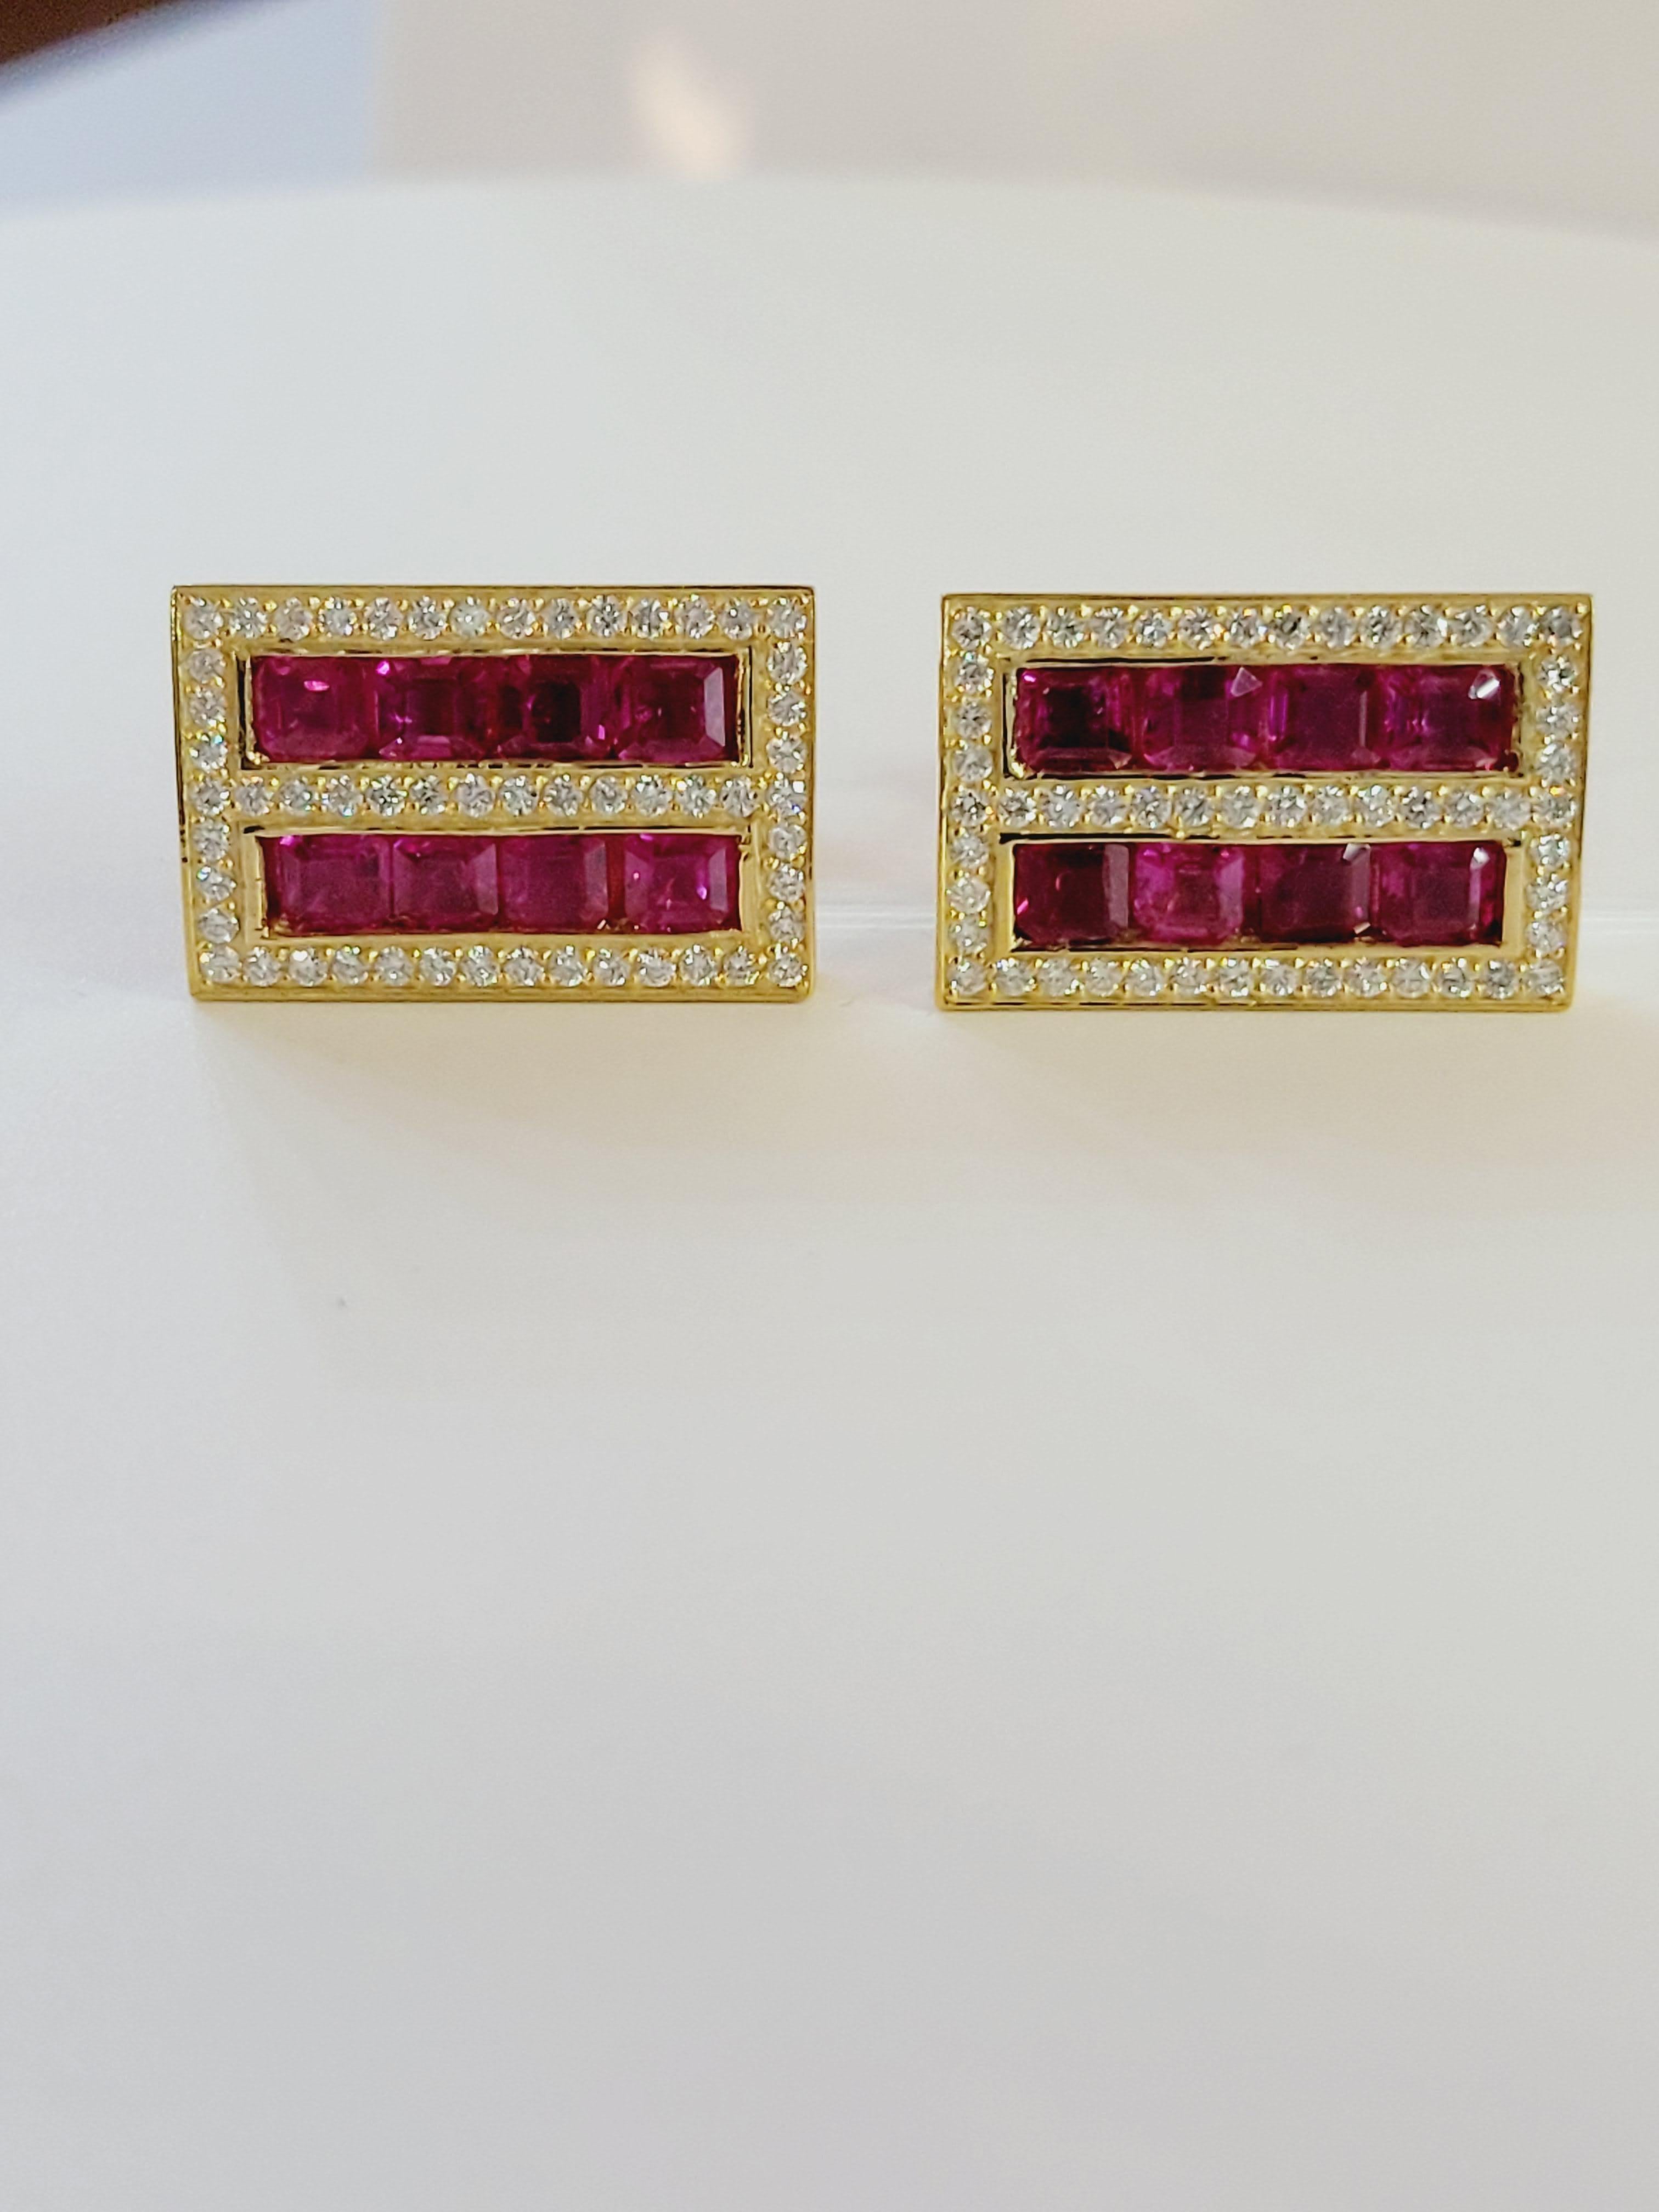 
Metal Color: Yellow Gold
Metal Purity: 14K
Total Wt. Diamond: 1.80 CTS
Total Wt. Color Stones: 5.80 CTS
Round Diamond: 1.80 CTS
Ruby: 5.80 CTS
Clarity VS
Color G – H
Gold Wt. 23.00 gm
Measurements 23 x 15mm

Elegant Set Cufflinks  with Rubies